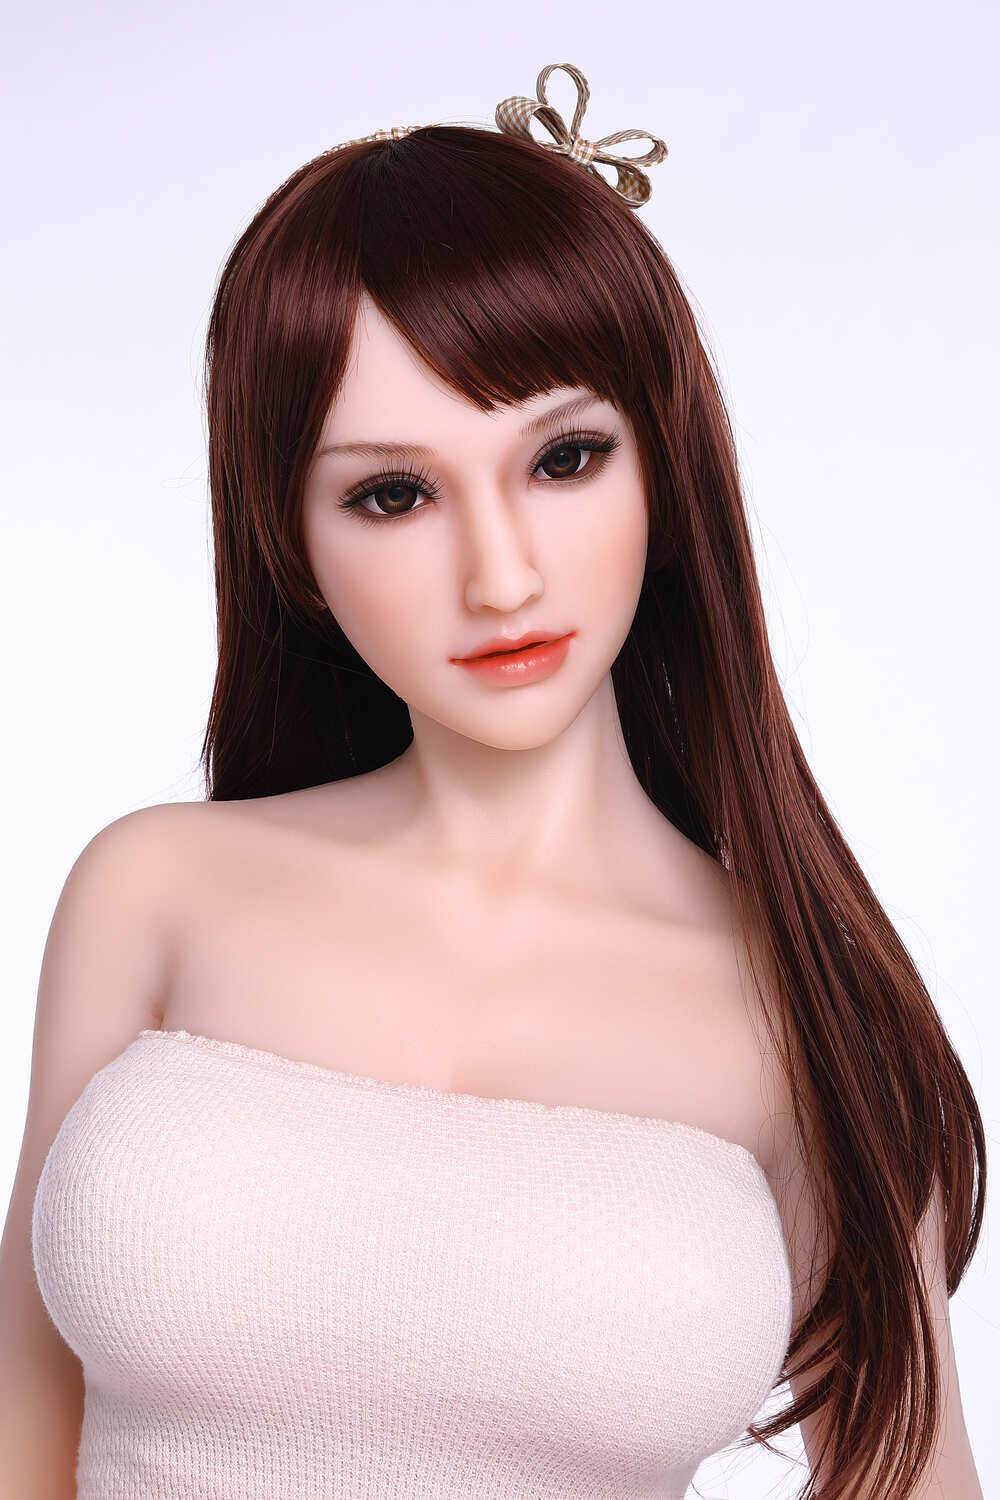 Pretty Silicone Head 156cm(5ft1) Brynnley Of The Sexy White Skin Sanhui Doll image11